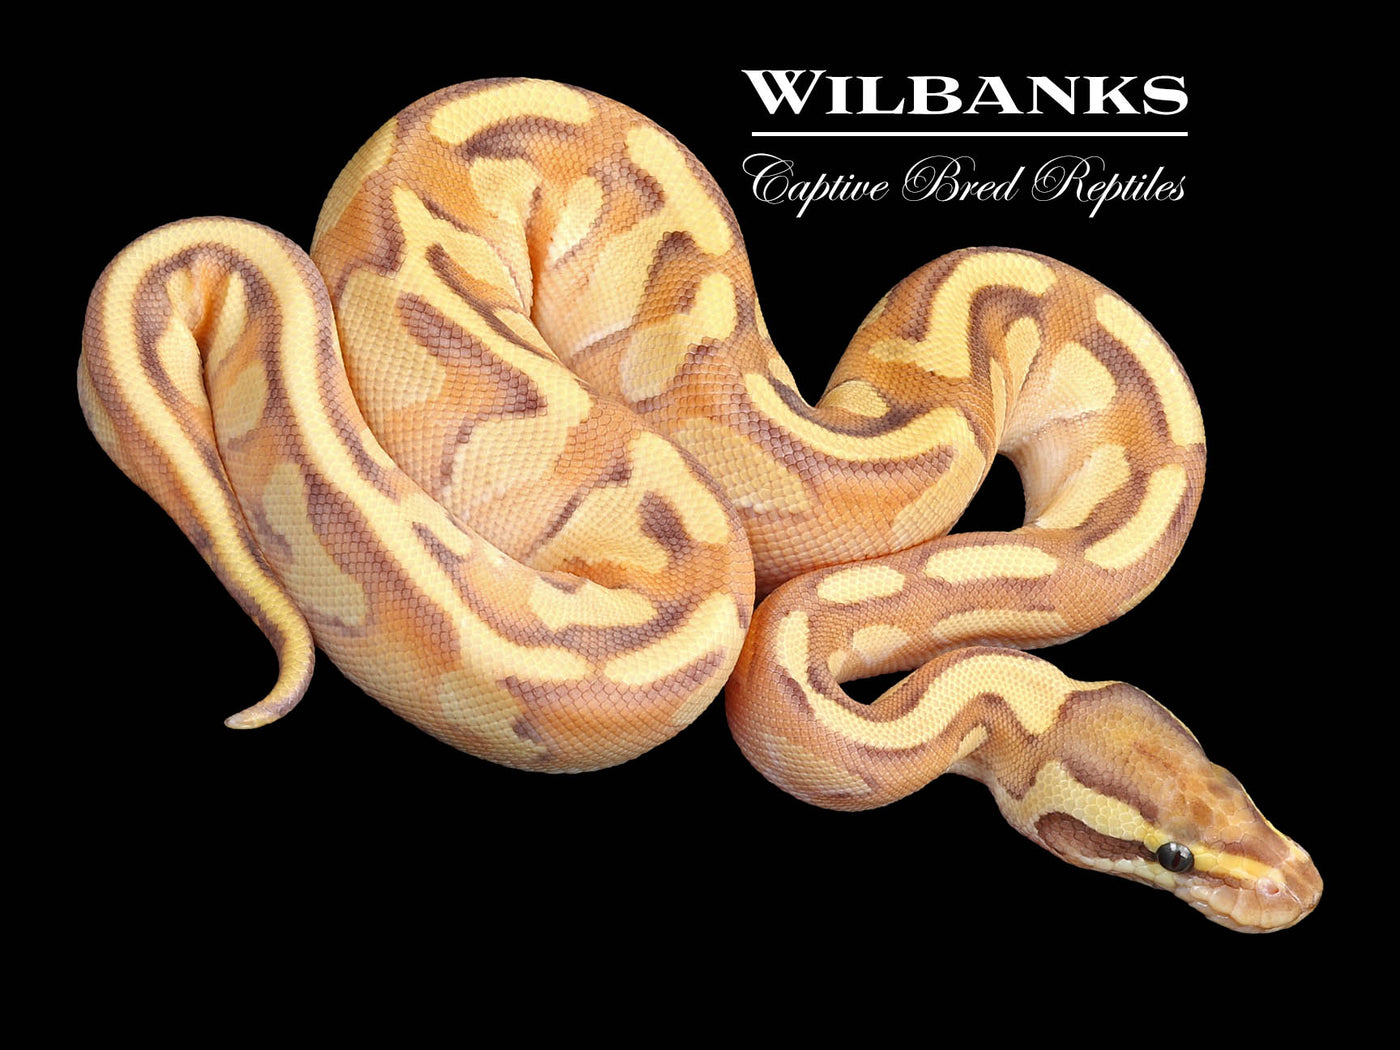 Nuclear Enchi Yellow Belly Ball Python ♀ '23